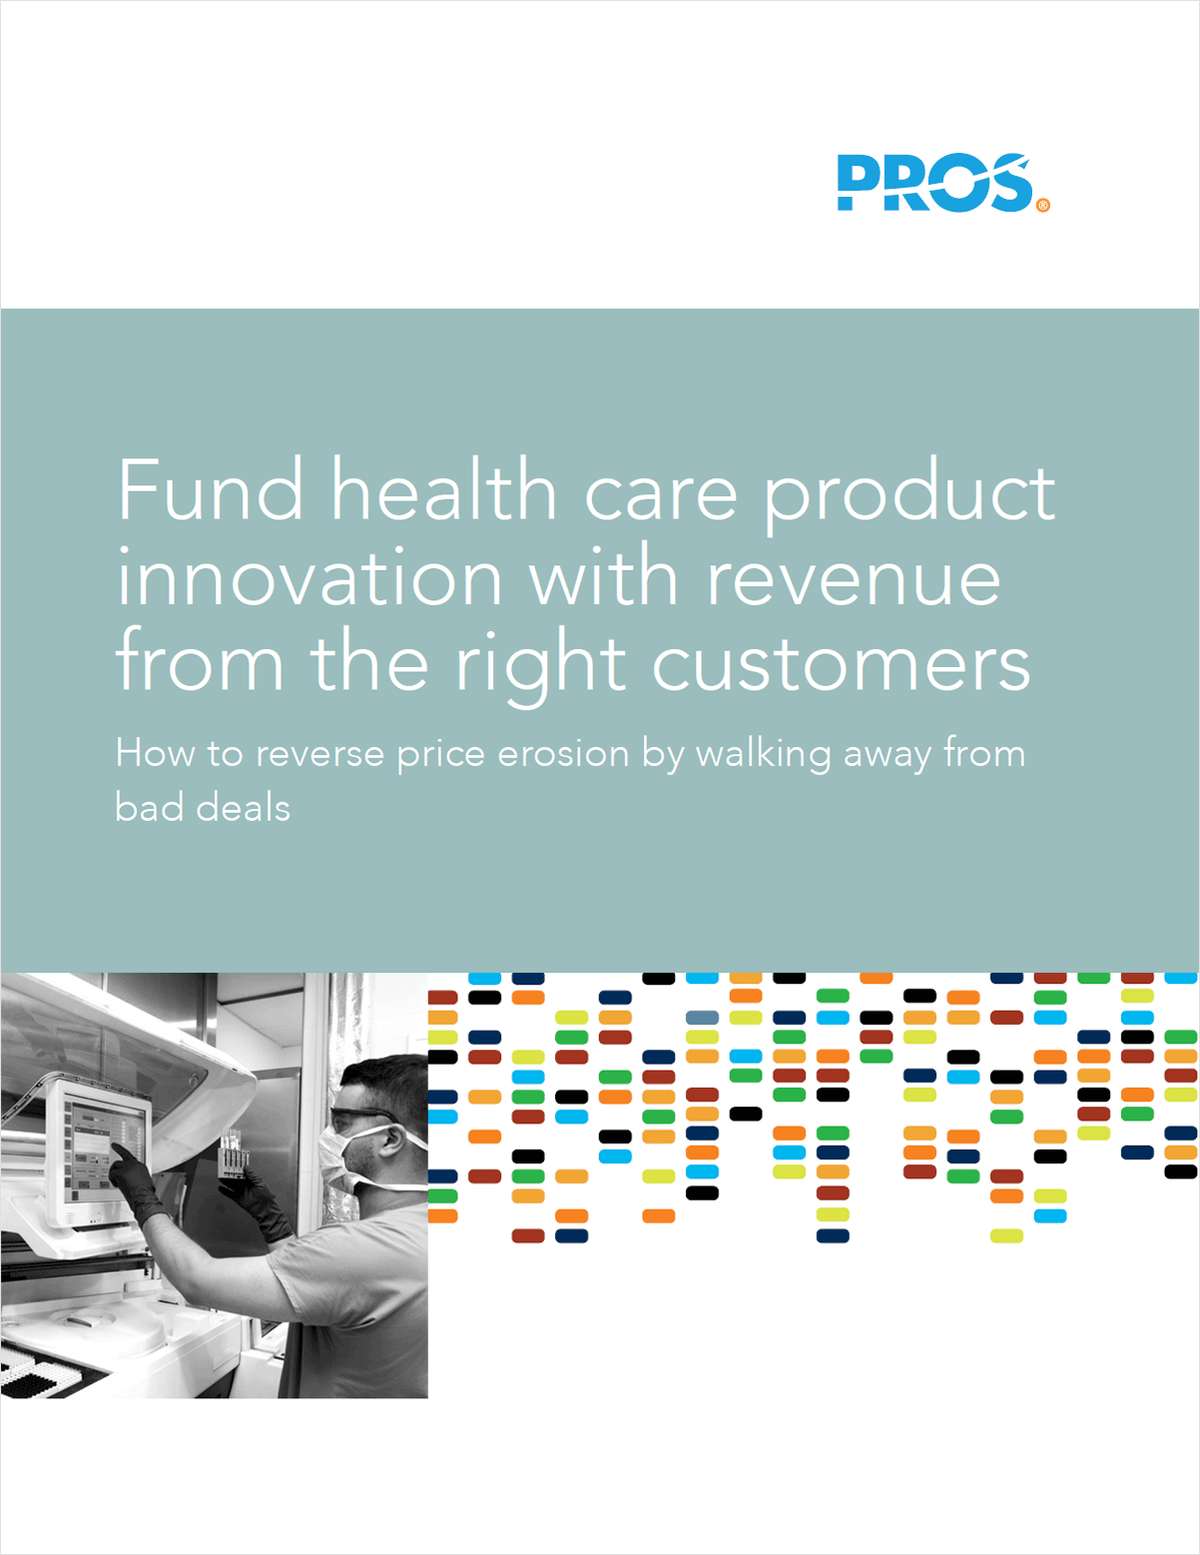 Fund Health Care Product Innovation with Revenue from the Right Customers